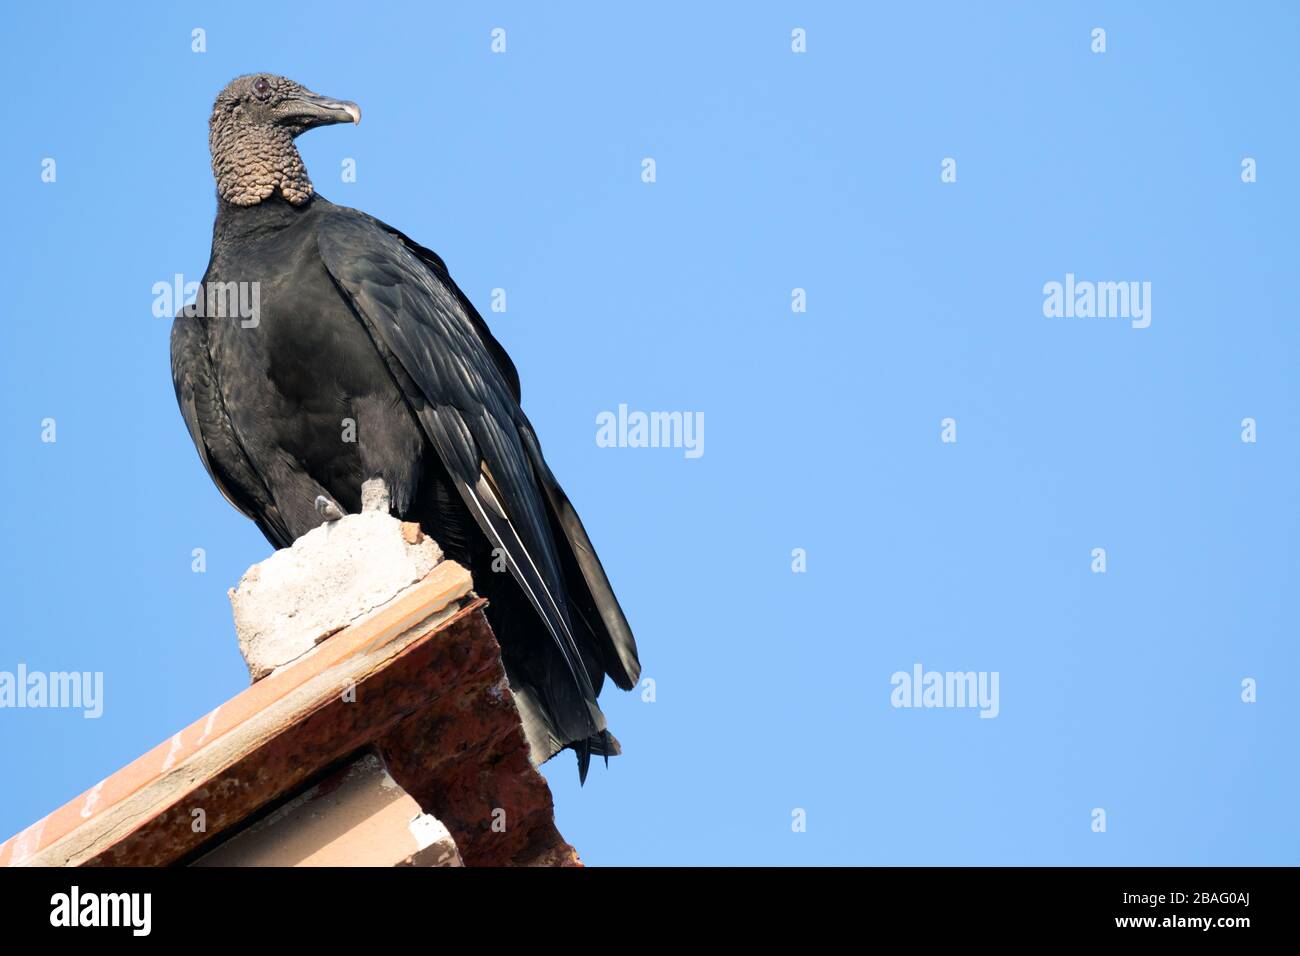 A Black Vulture (Coragyps atratus), also known as the American Black Vulture perched on a rooftop in Nicaragua along the coast. Stock Photo